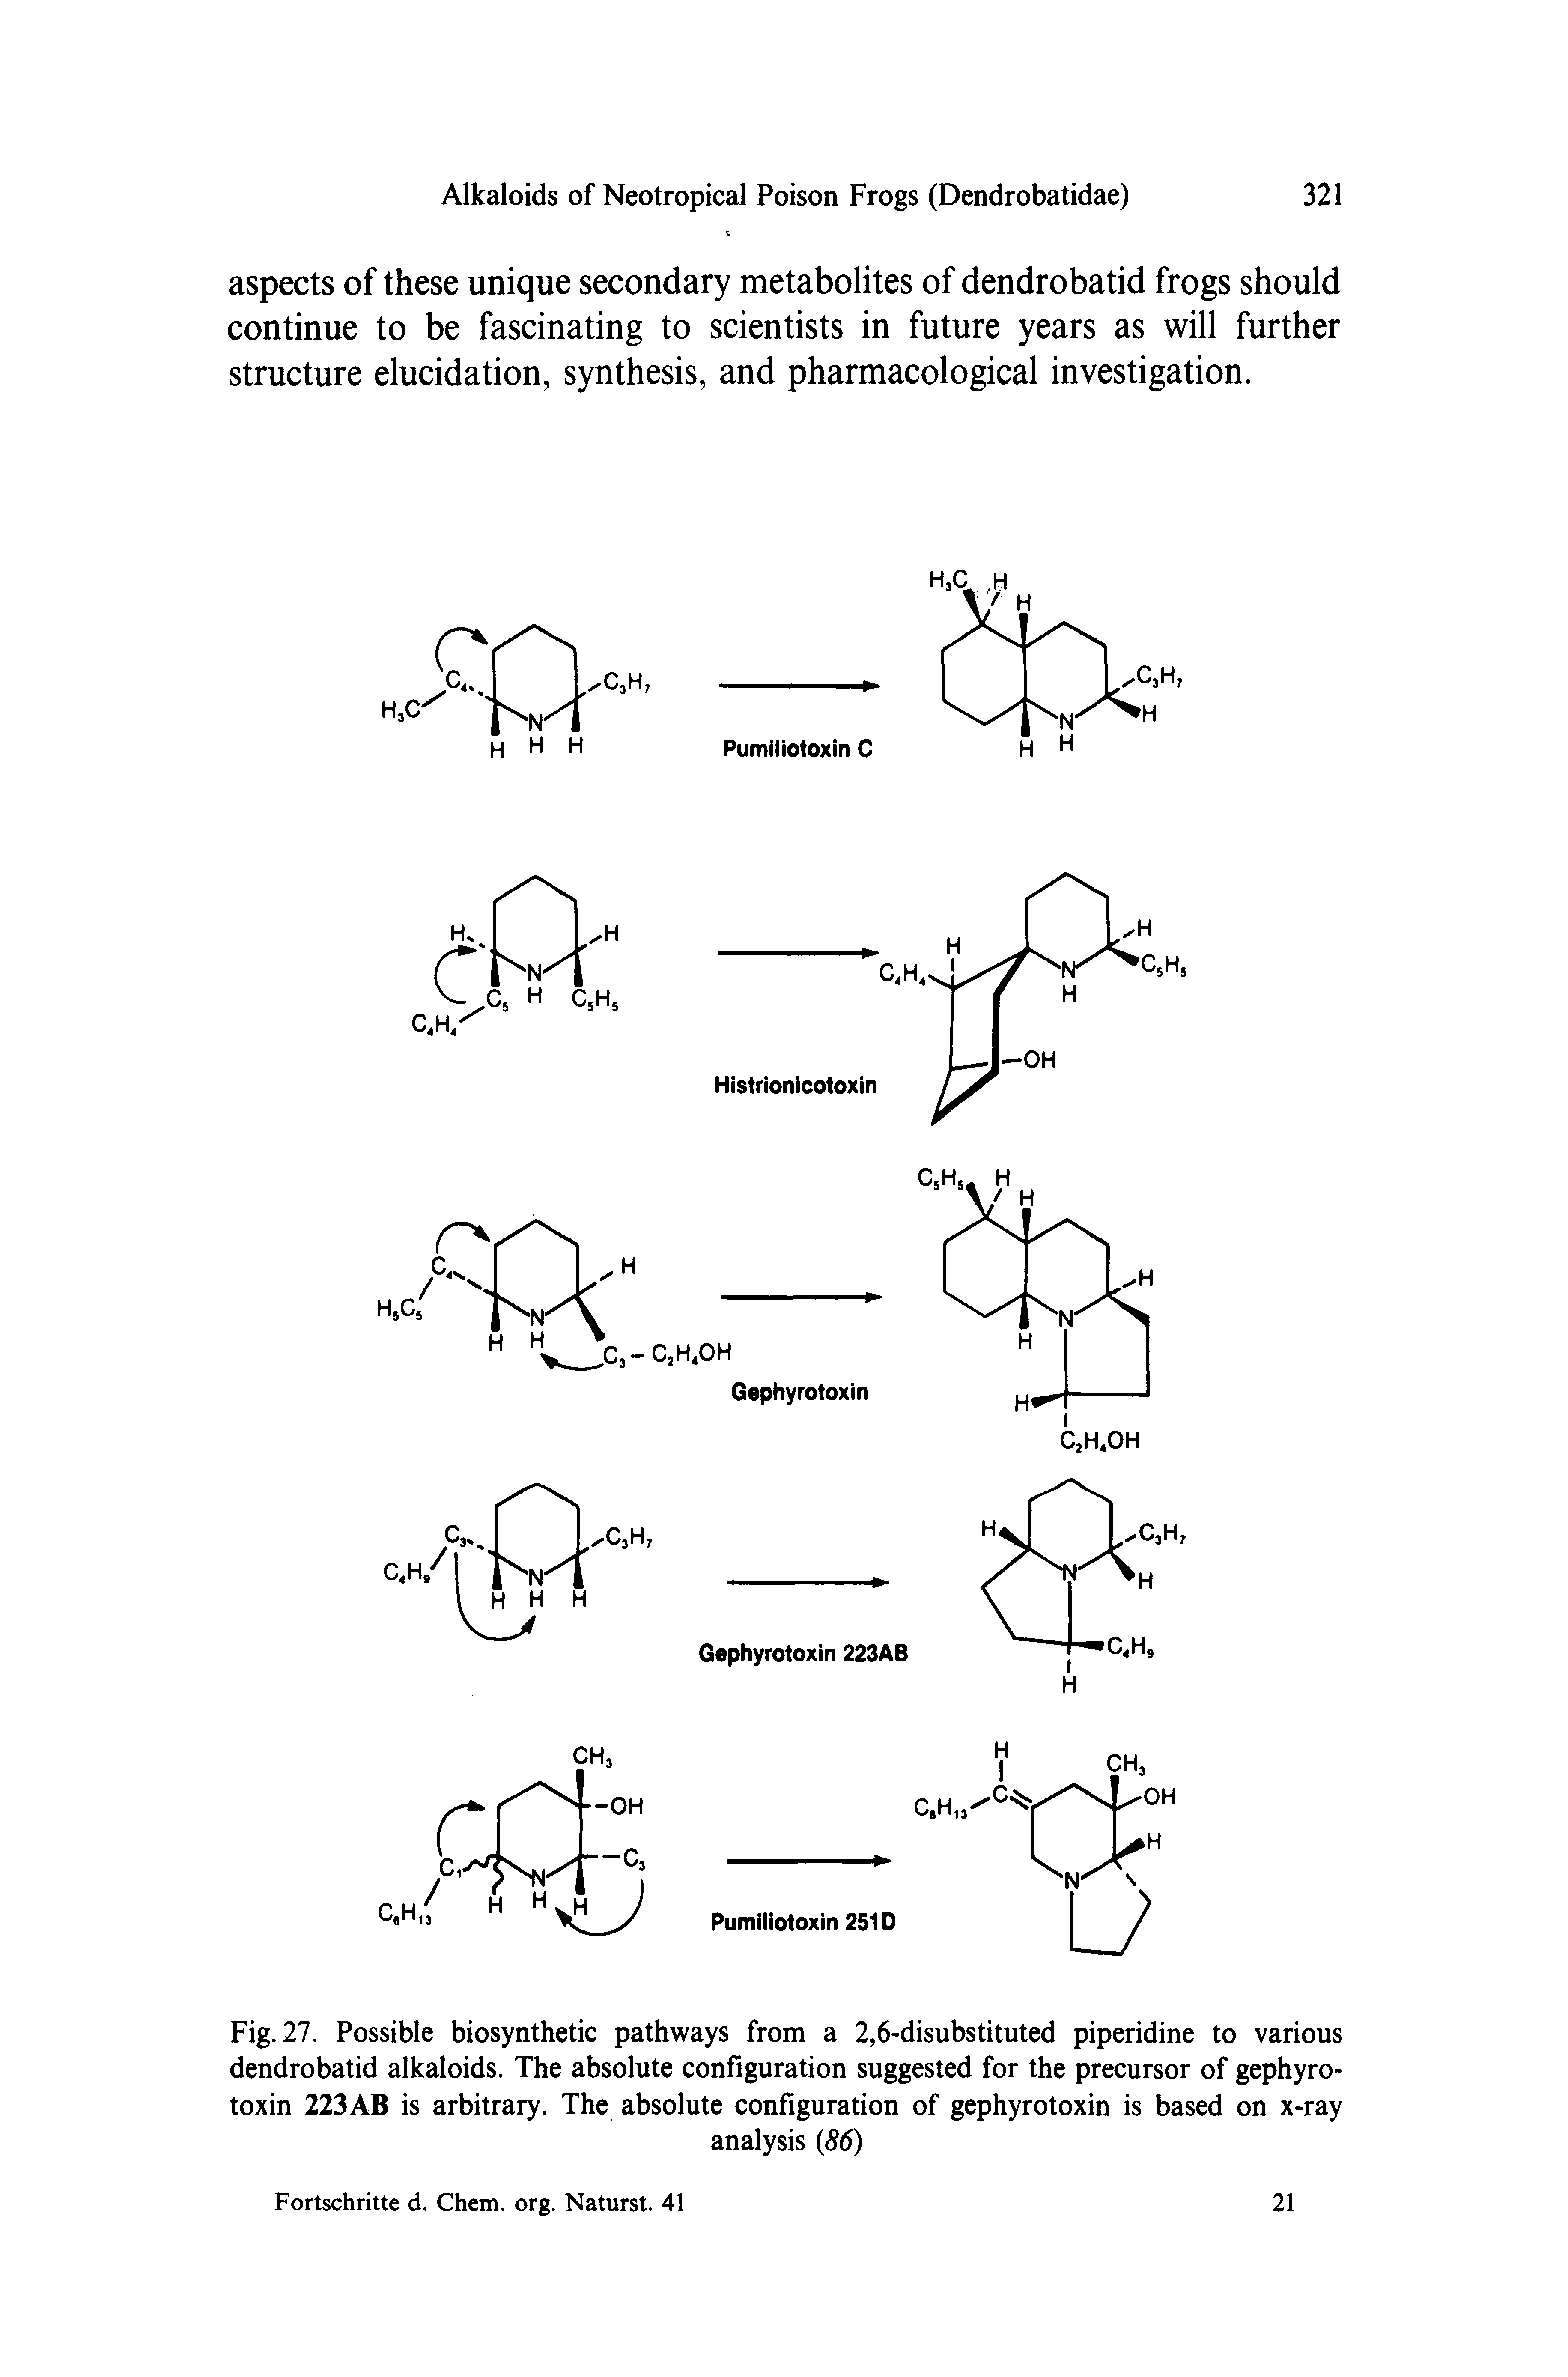 Fig. 27. Possible biosynthetic pathways from a 2,6-disubstituted piperidine to various dendrobatid alkaloids. The absolute configuration suggested for the precursor of gephyrotoxin 223AB is arbitrary. The absolute configuration of gephyrotoxin is based on x-ray...